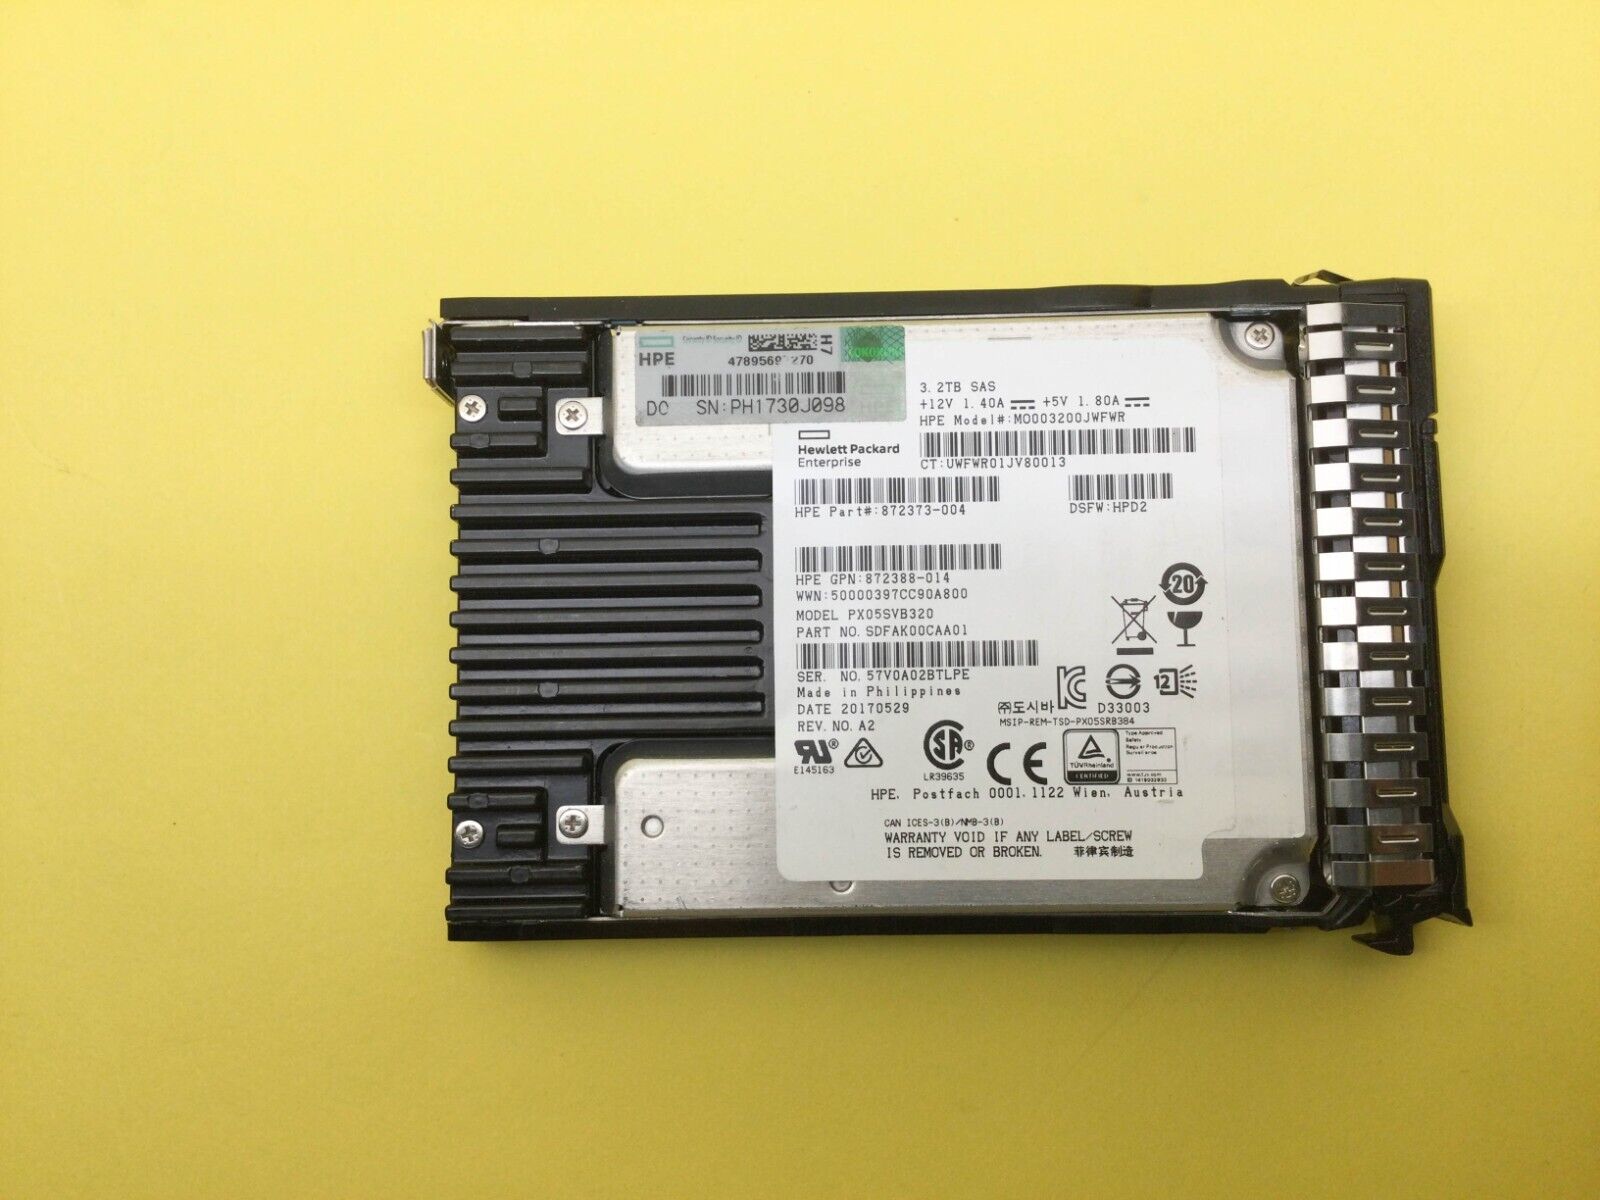 872386-B21 HPE 3.2TB SAS 12G MIXED USE SFF (2.5IN) SC PM5 SSD 872511-001